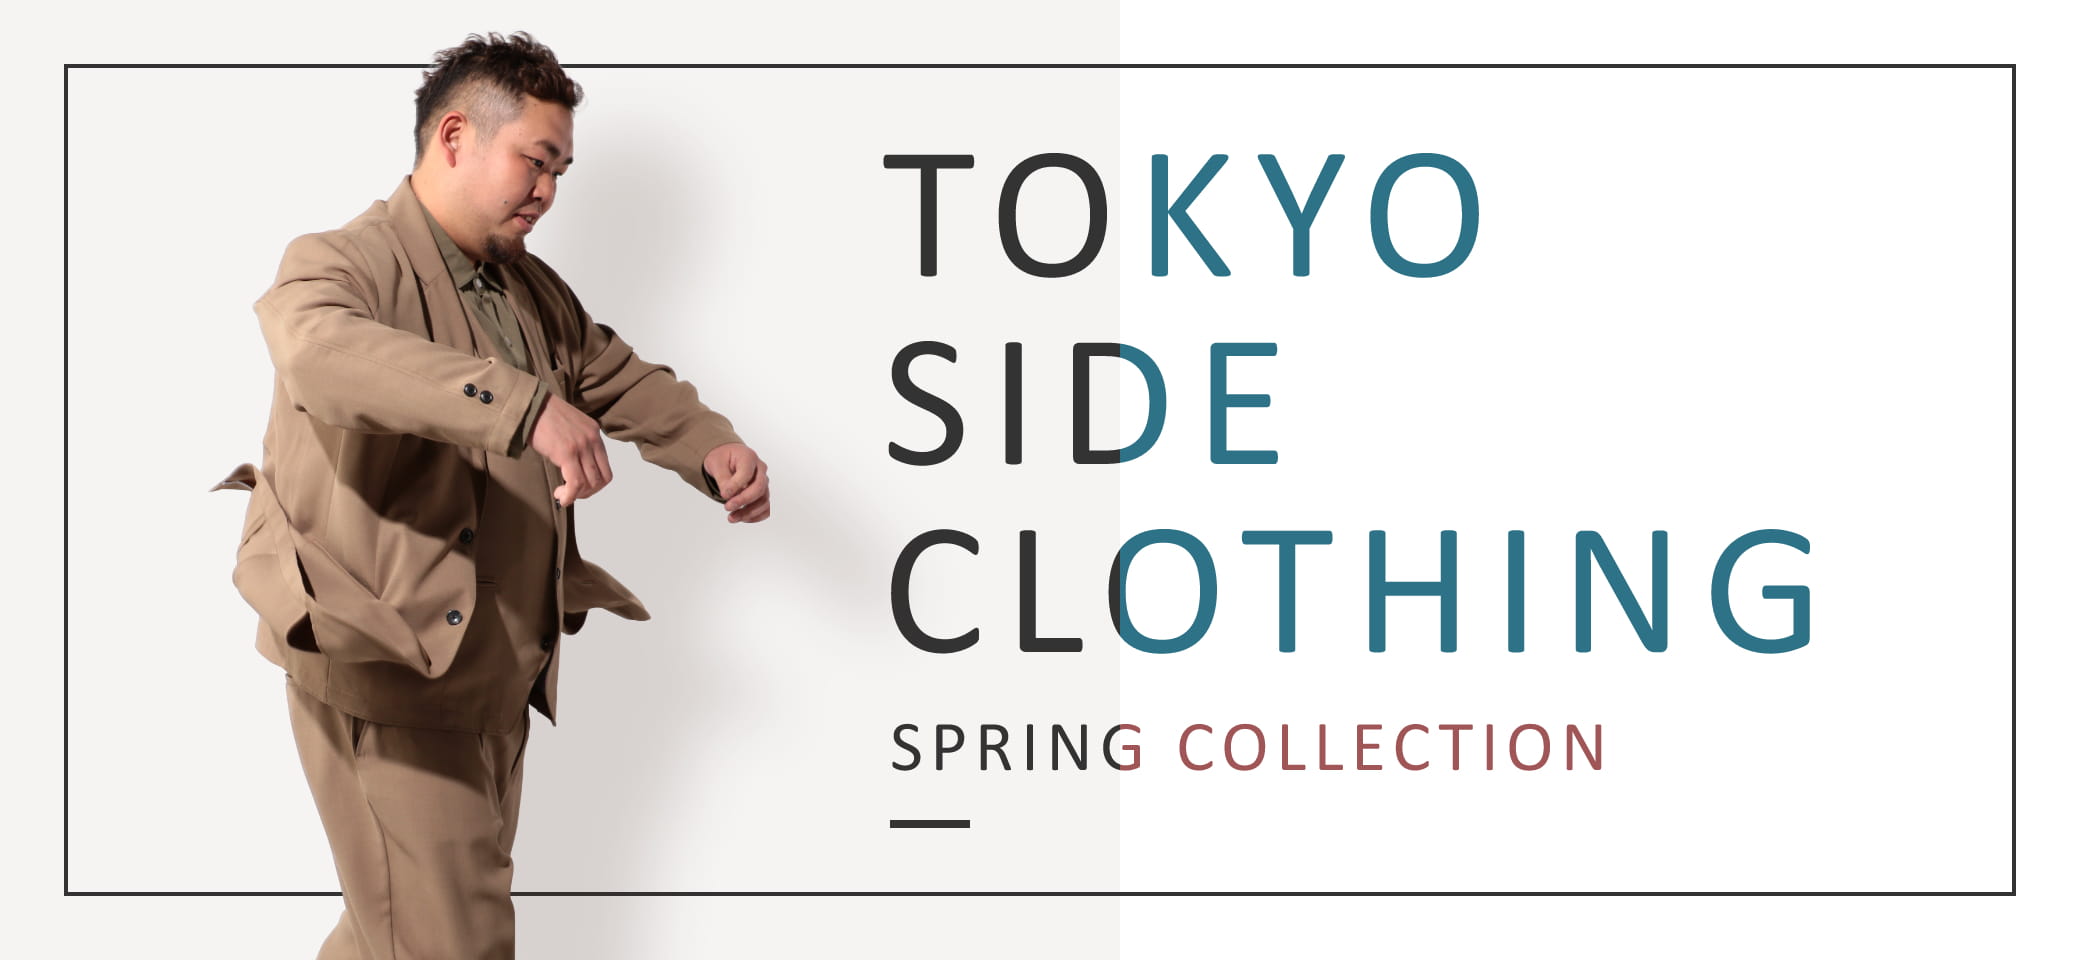 TOKYO SIDE CLOTHING SPRING COLLECTION